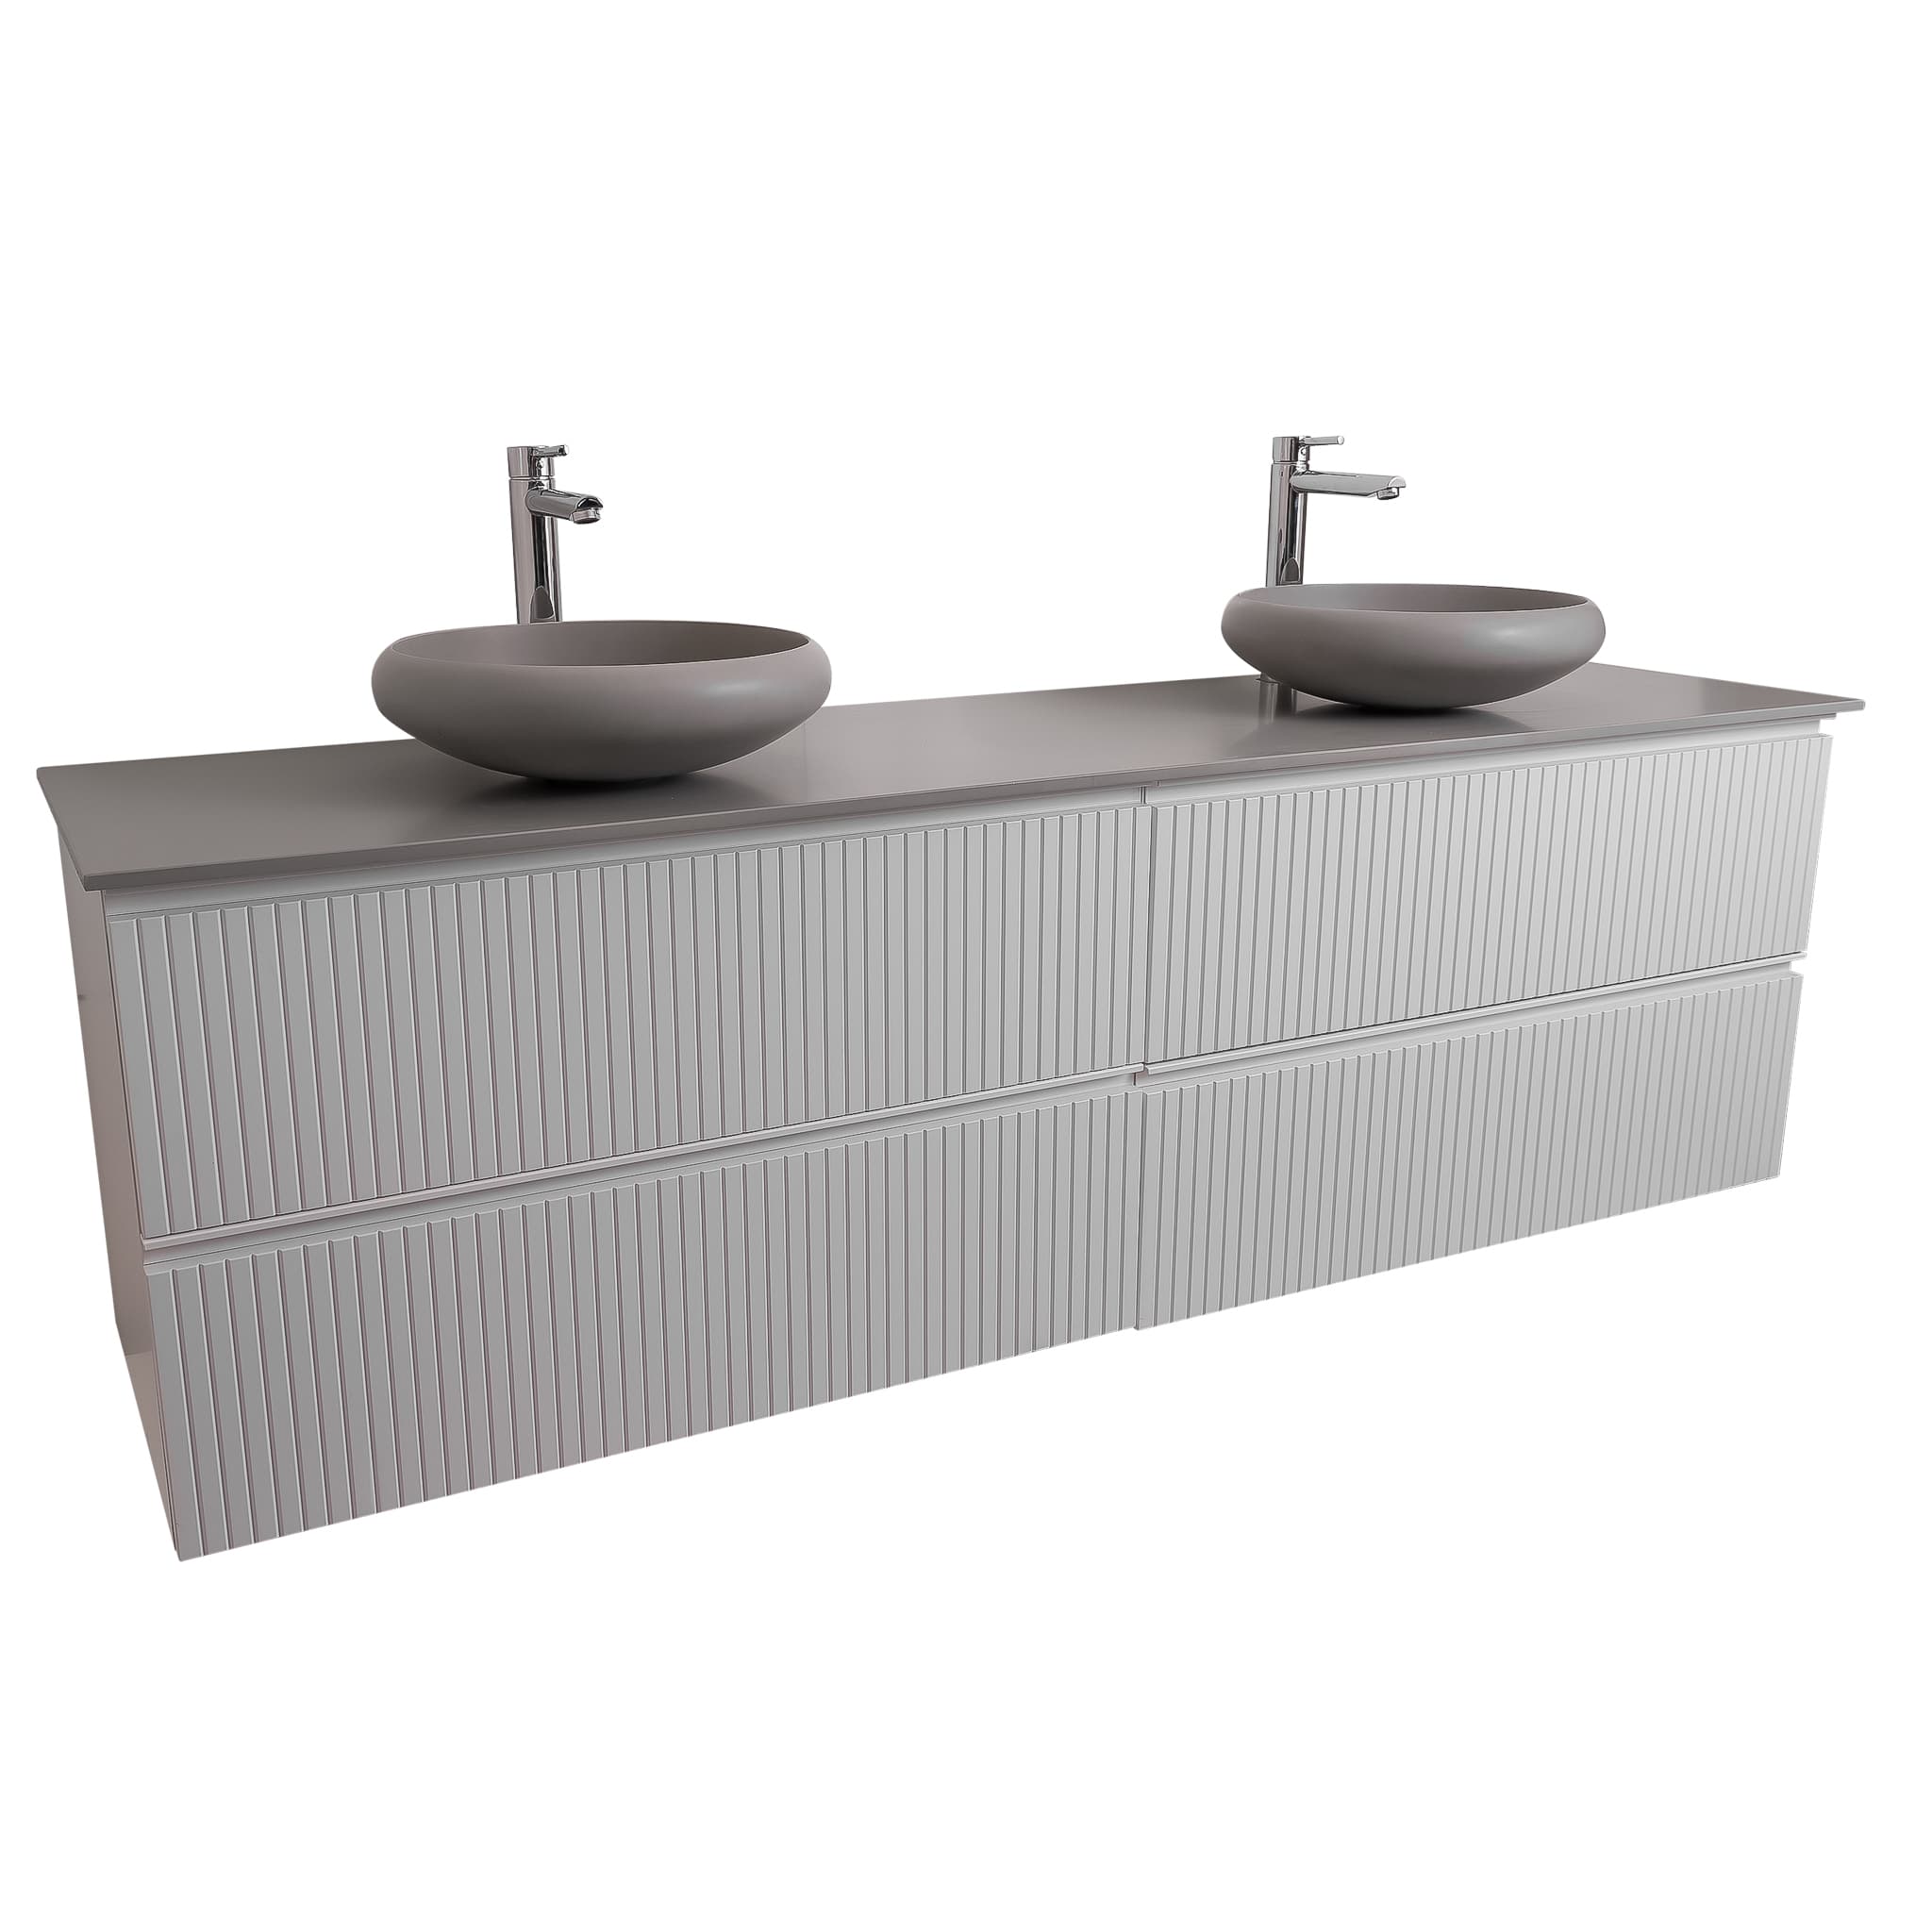 Ares 72 Matte White Cabinet, Solid Surface Flat Grey Counter And Two Round Solid Surface Grey Basin 1153, Wall Mounted Modern Vanity Set